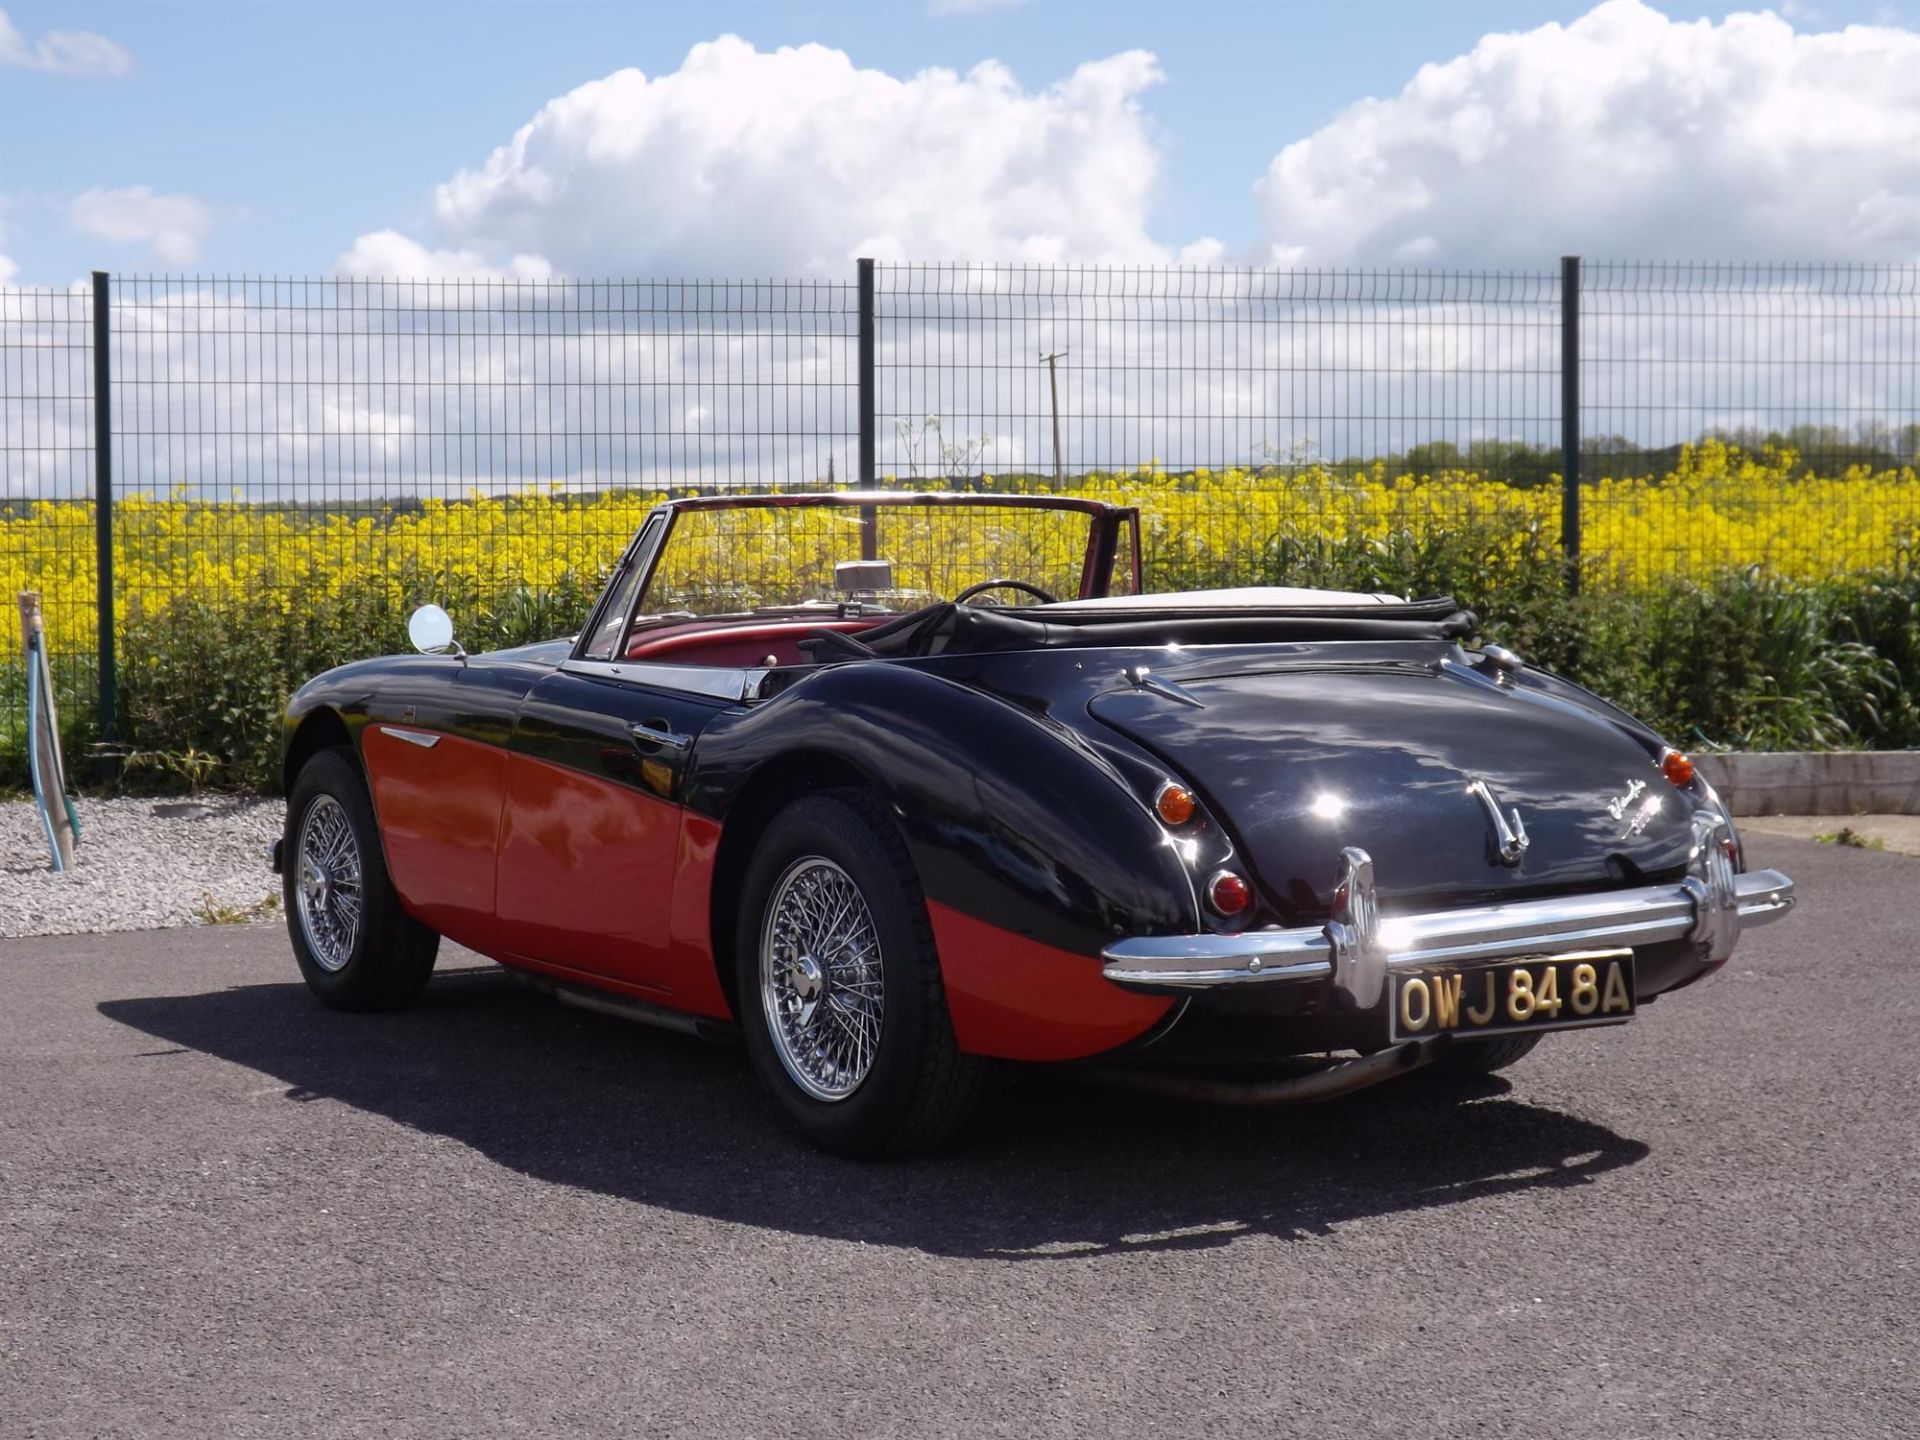 1963 Austin Healey 3000 MKII A (BJ7) - Image 5 of 5